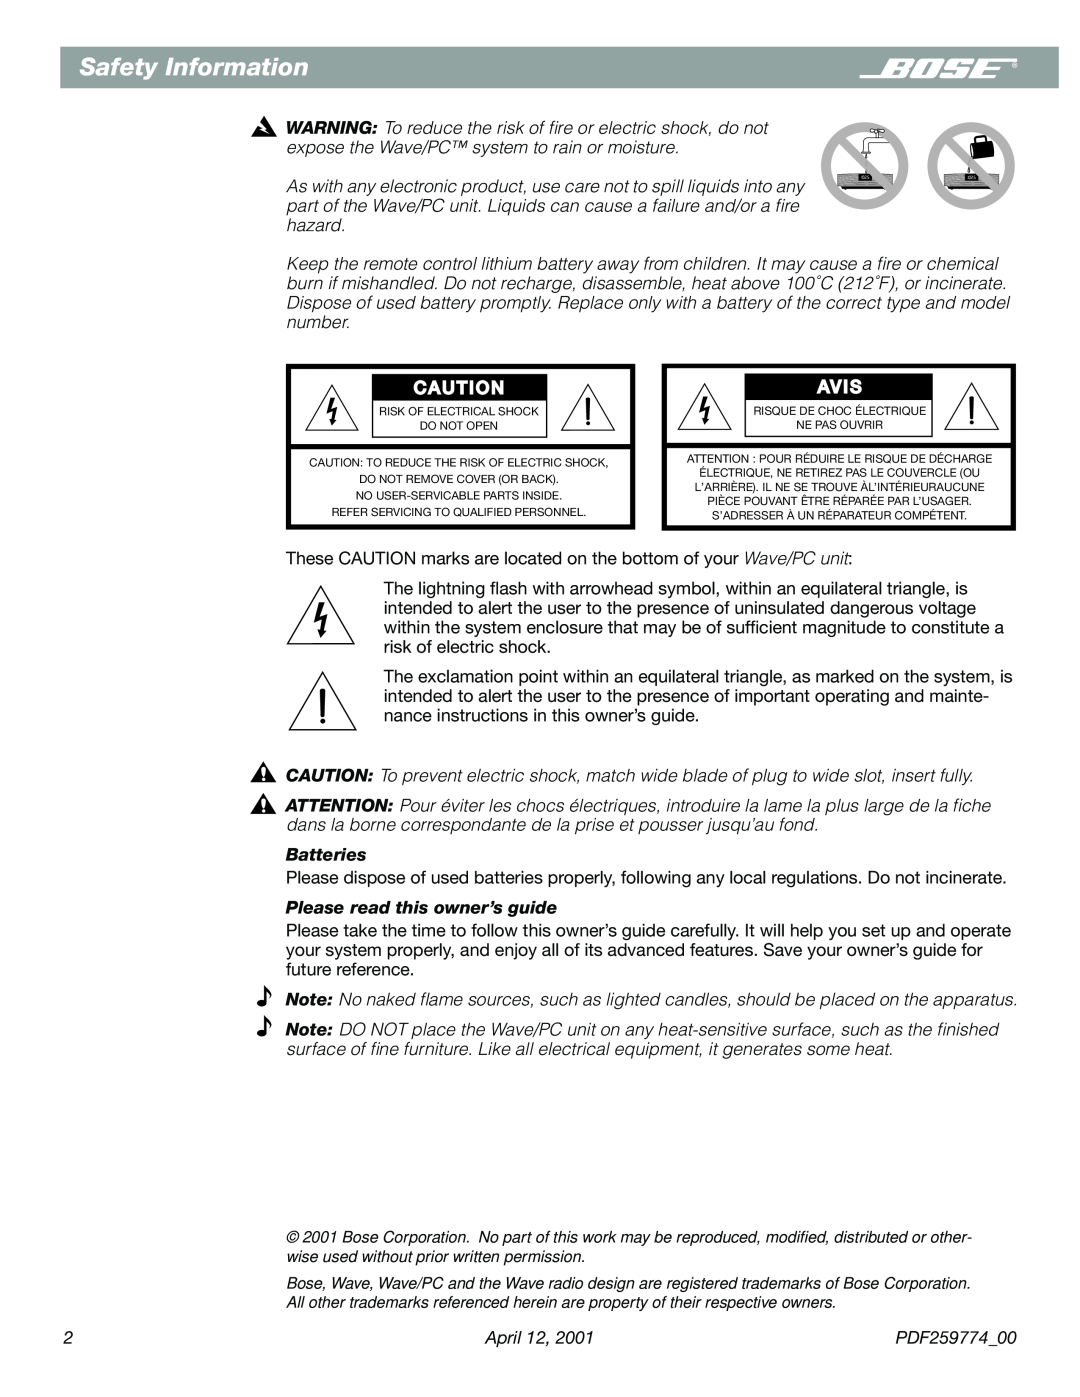 Bose PDF259774_00 manual Safety Information, Batteries, Please read this owner’s guide 